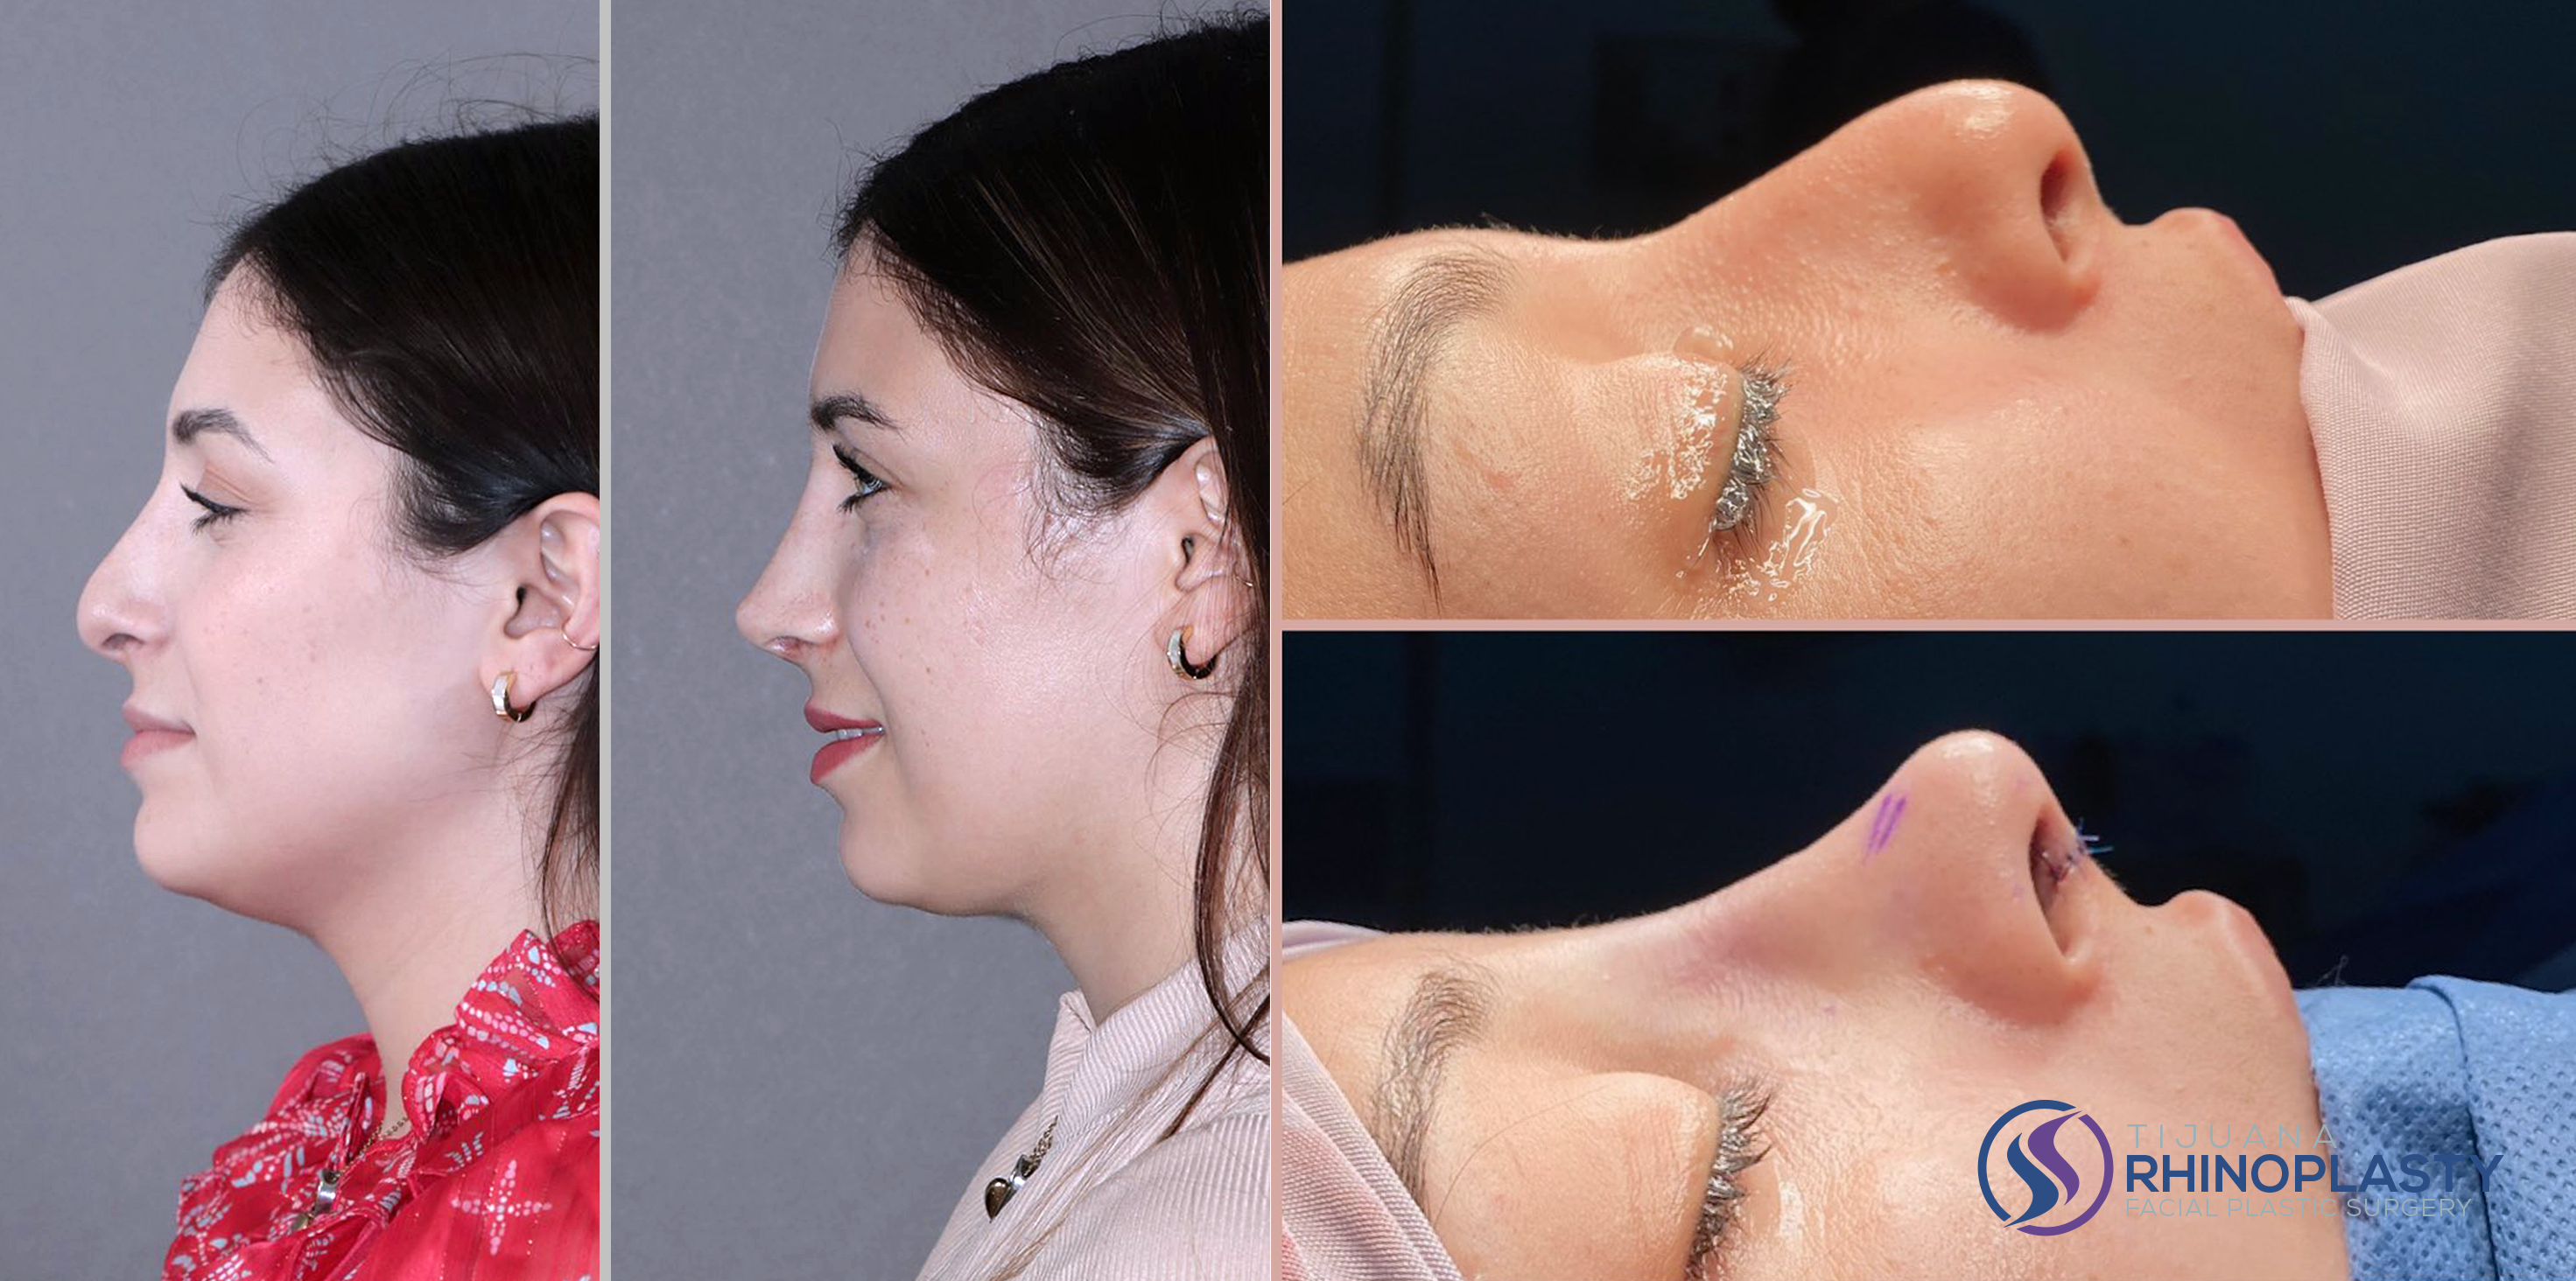 Tijuana Rhinoplasty offers facial plastic surgery procedures to reshape structures in the head and neck — typically the nose, ears, chin, cheekbones and neckline.